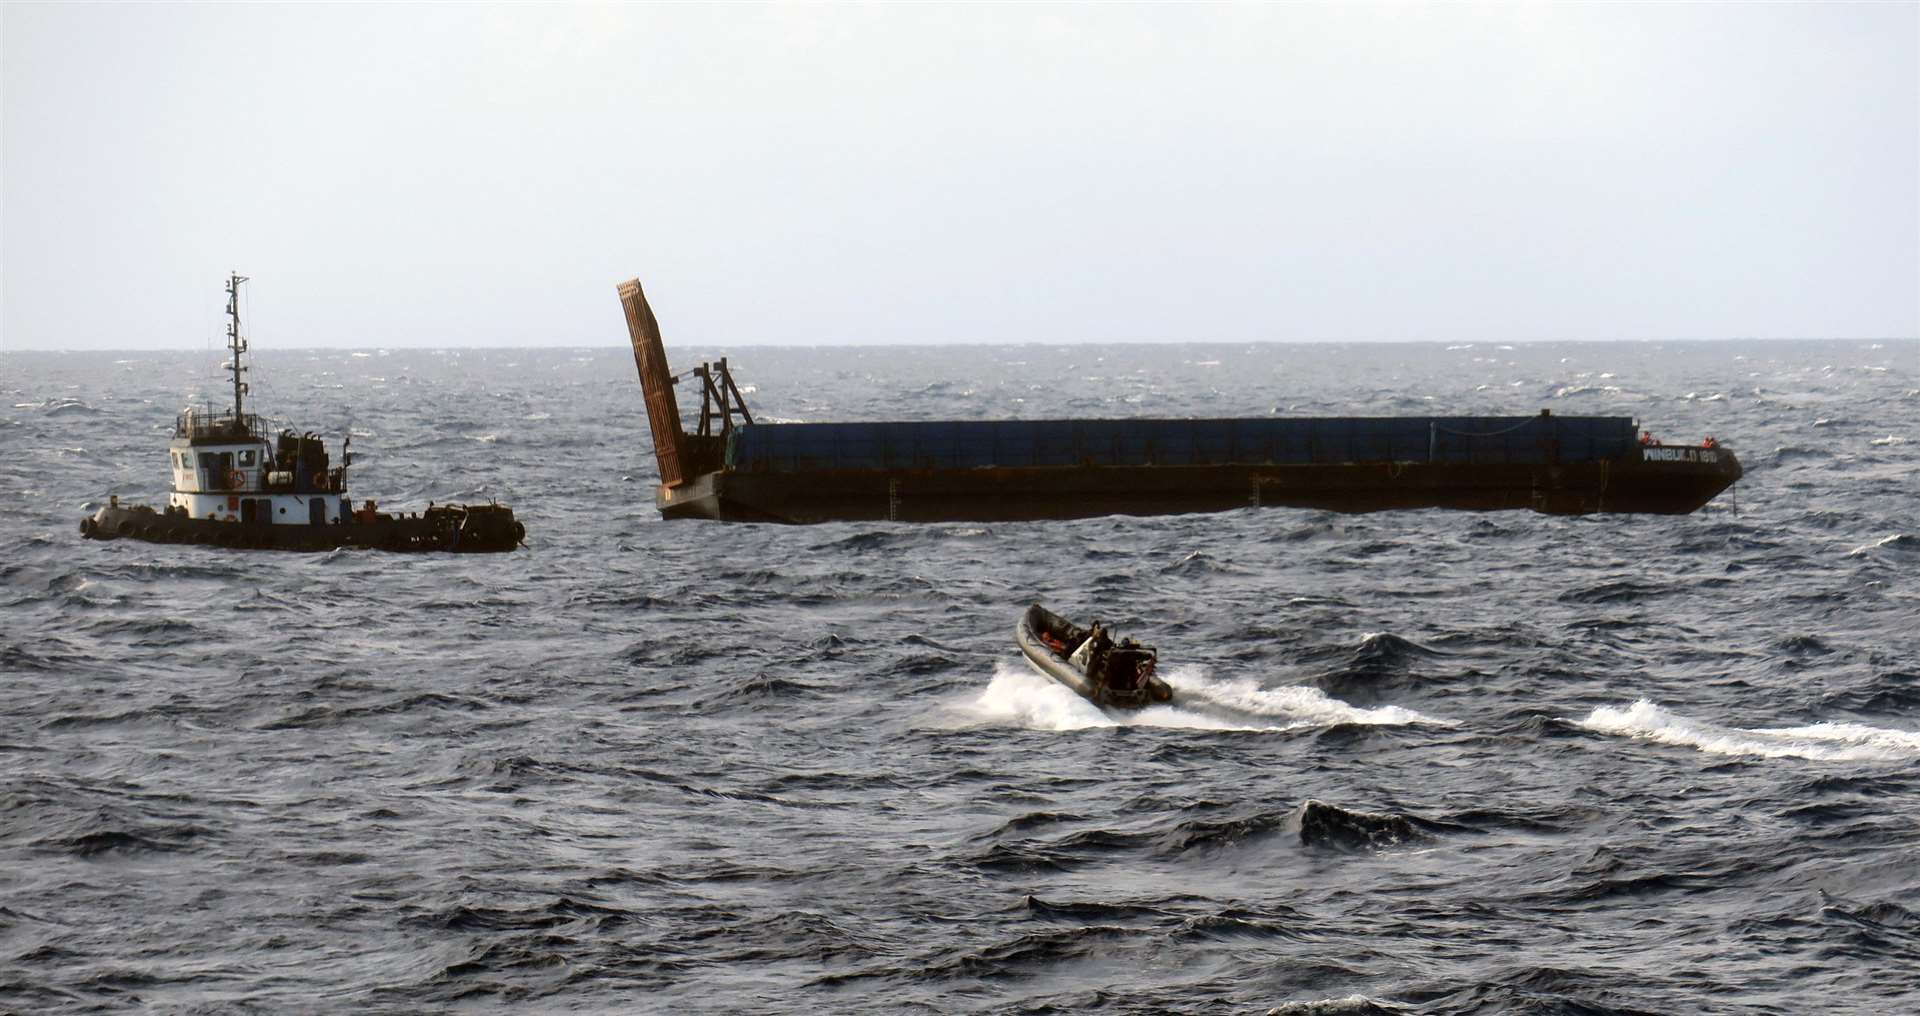 HMS Medway's sea boat heads towards the stricken tug and barge. Photo: Royal Navy